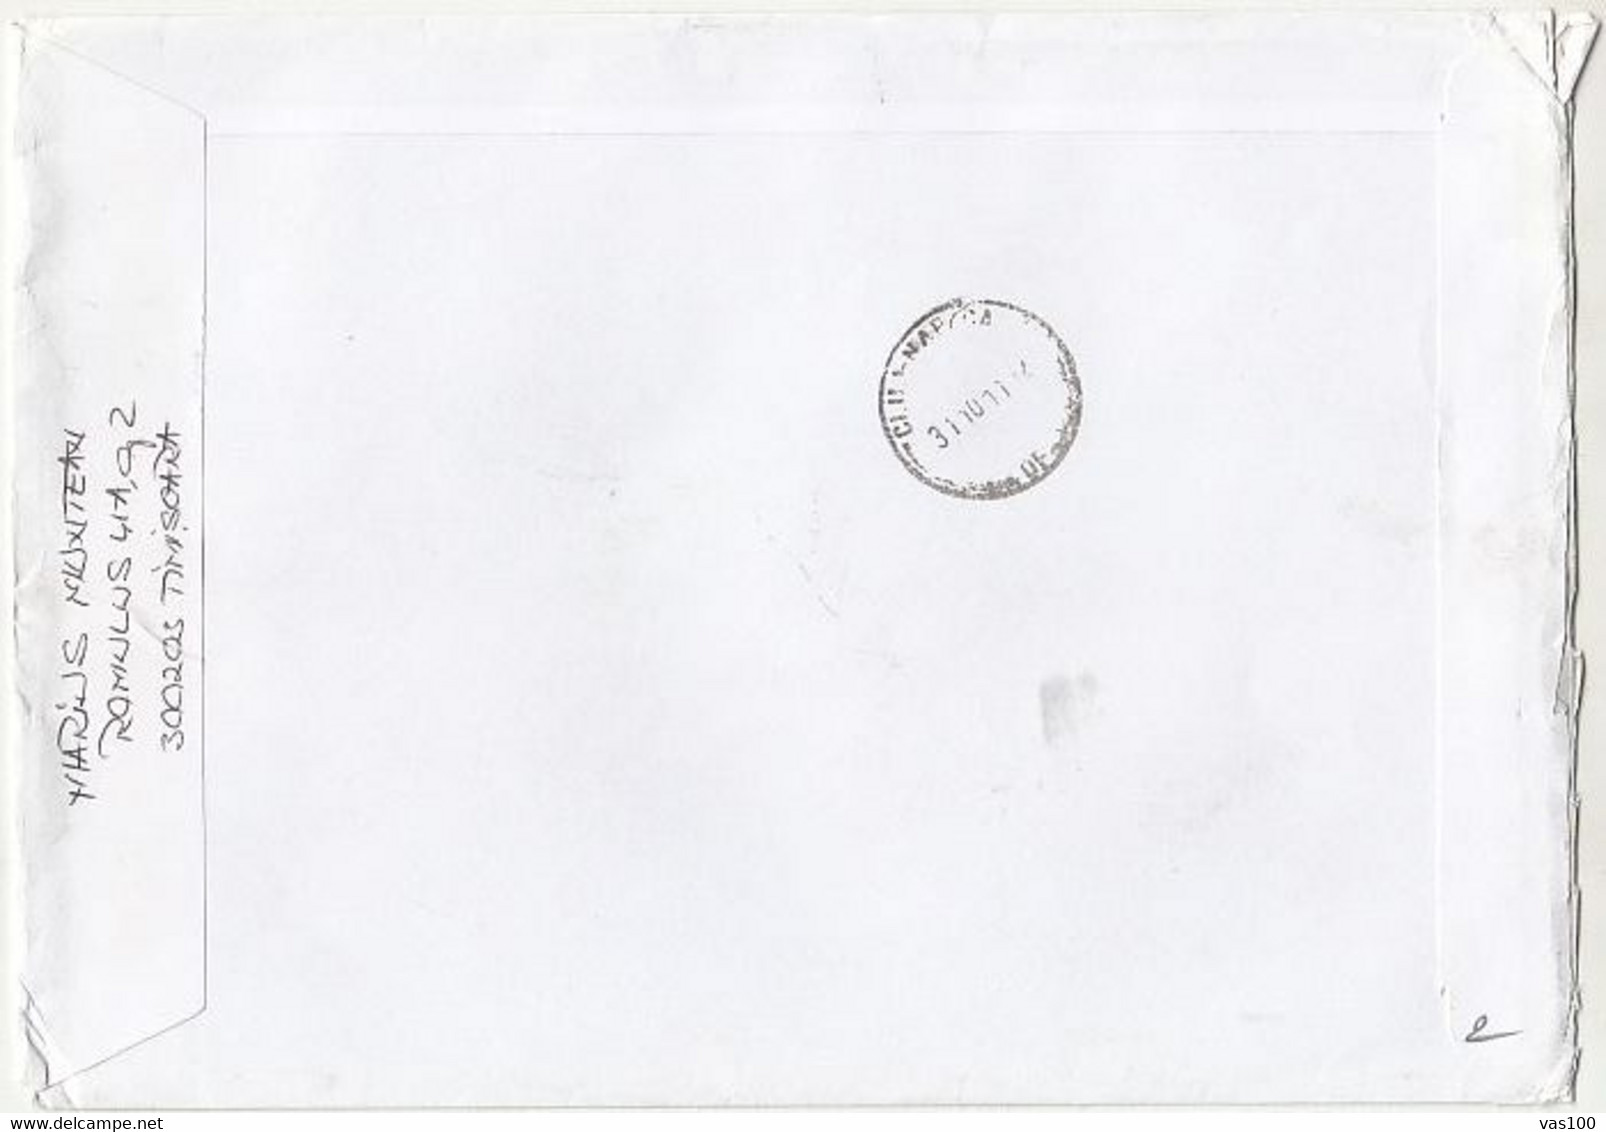 POTTERY, STAMPS ON REGISTERED COVER, 2011, ROMANIA - Covers & Documents